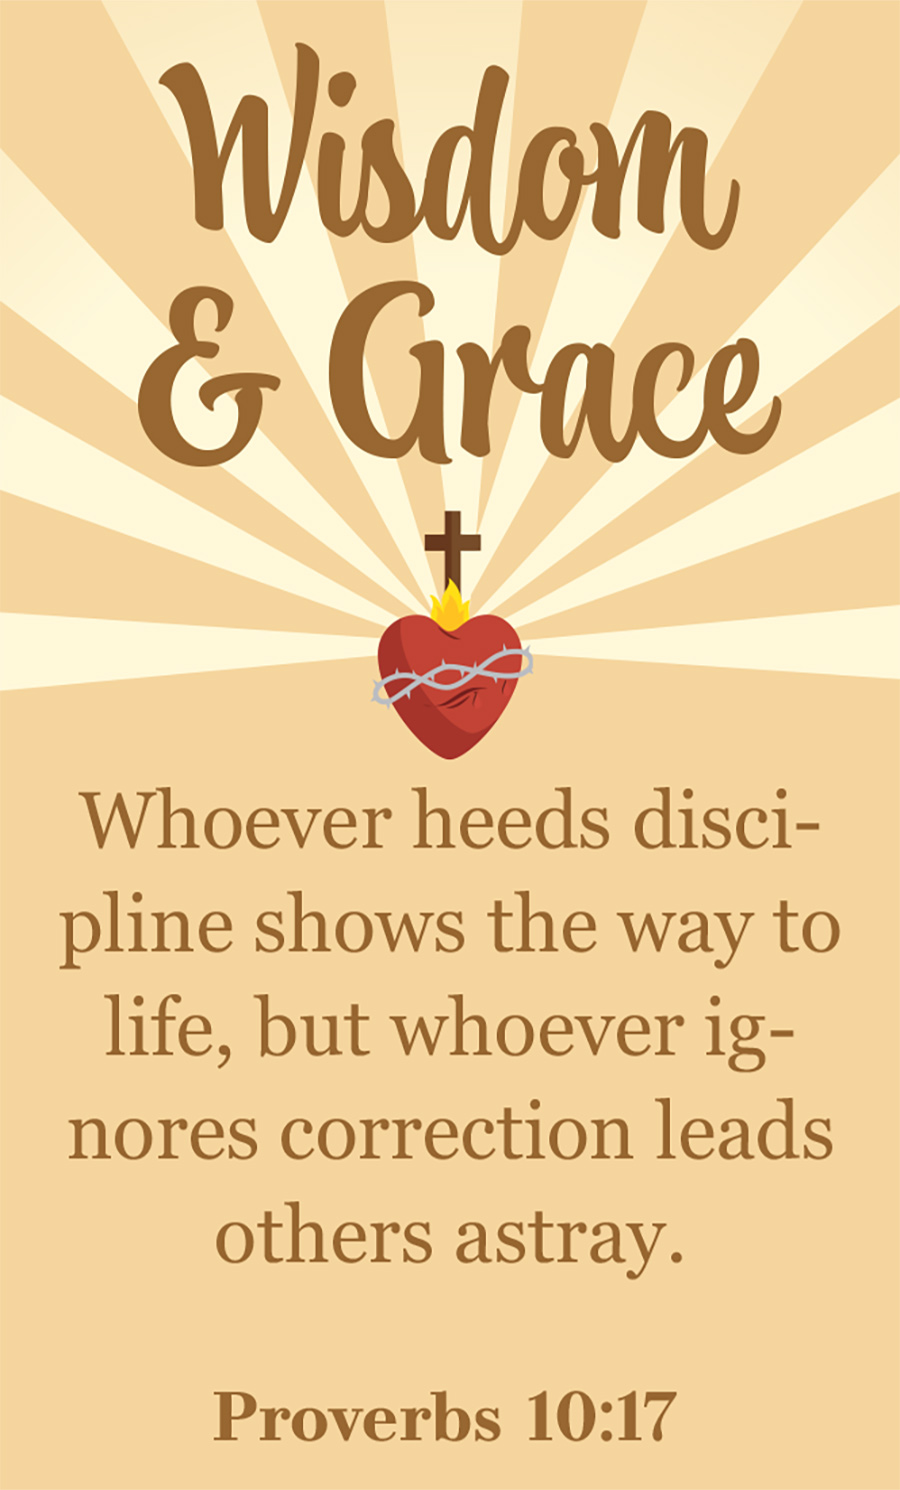 Wisdom & Grace bible verse (Proverbs 10:17) sentence with a red flamed heat floating in the air and brown cross symbol floating above the heart with nine ray beam sun shaped lights in the distance